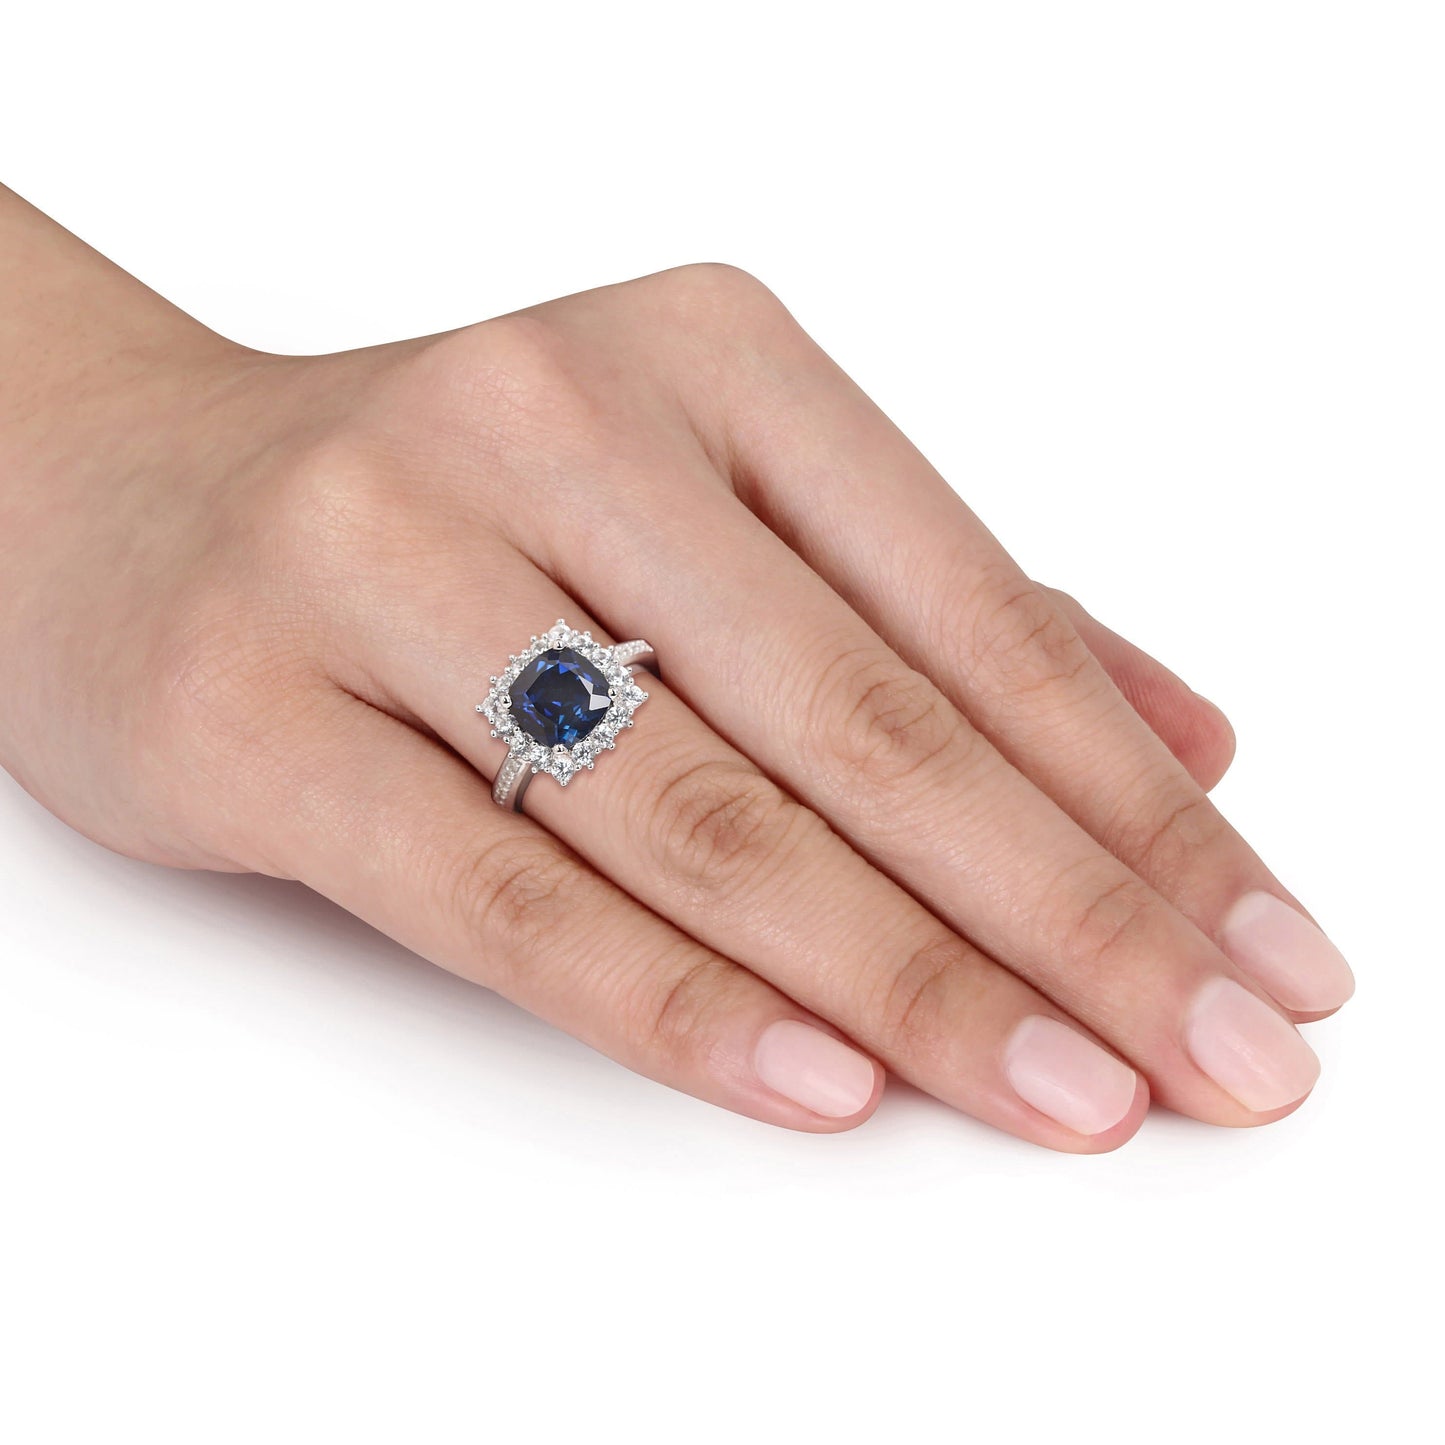 Blue & White Sapphire Ring With Diamond Accents